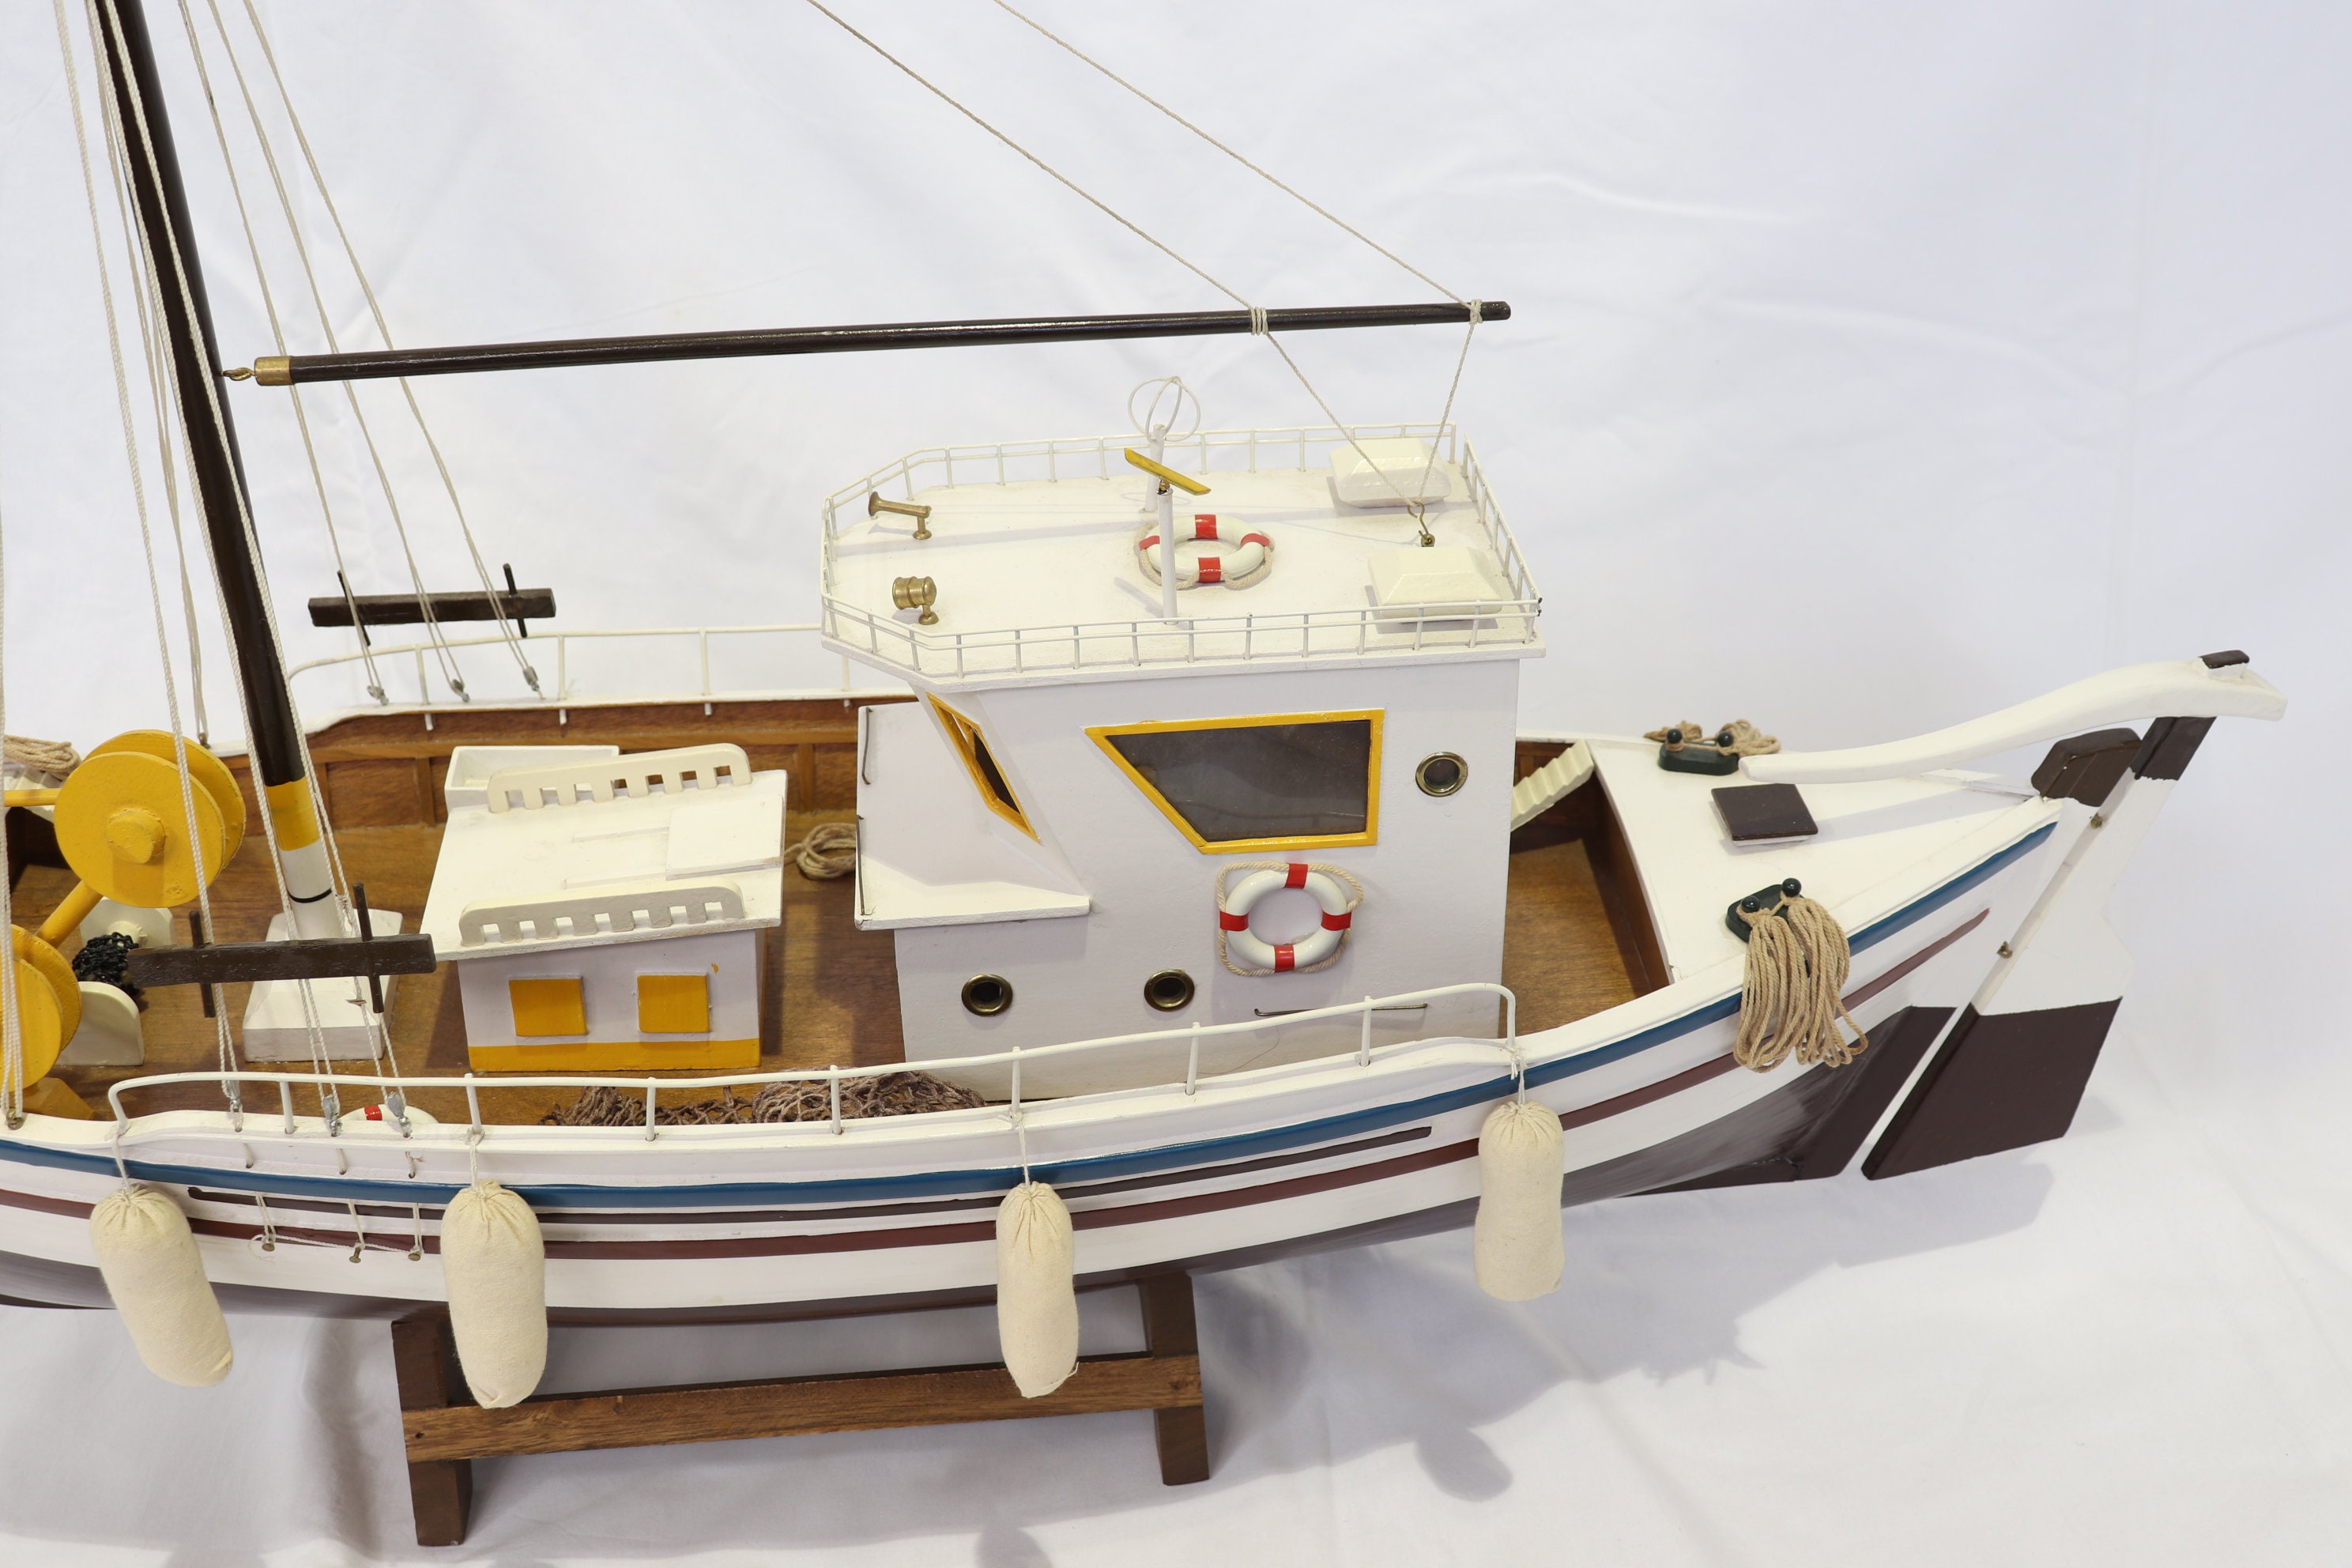 Vintage Wooden Handmade Fishing Boat Model, Wooden Handmade Ship Model,  Greek Ship Model, Fisherman Gifts, Fishing Decor, Unique Home Decor 